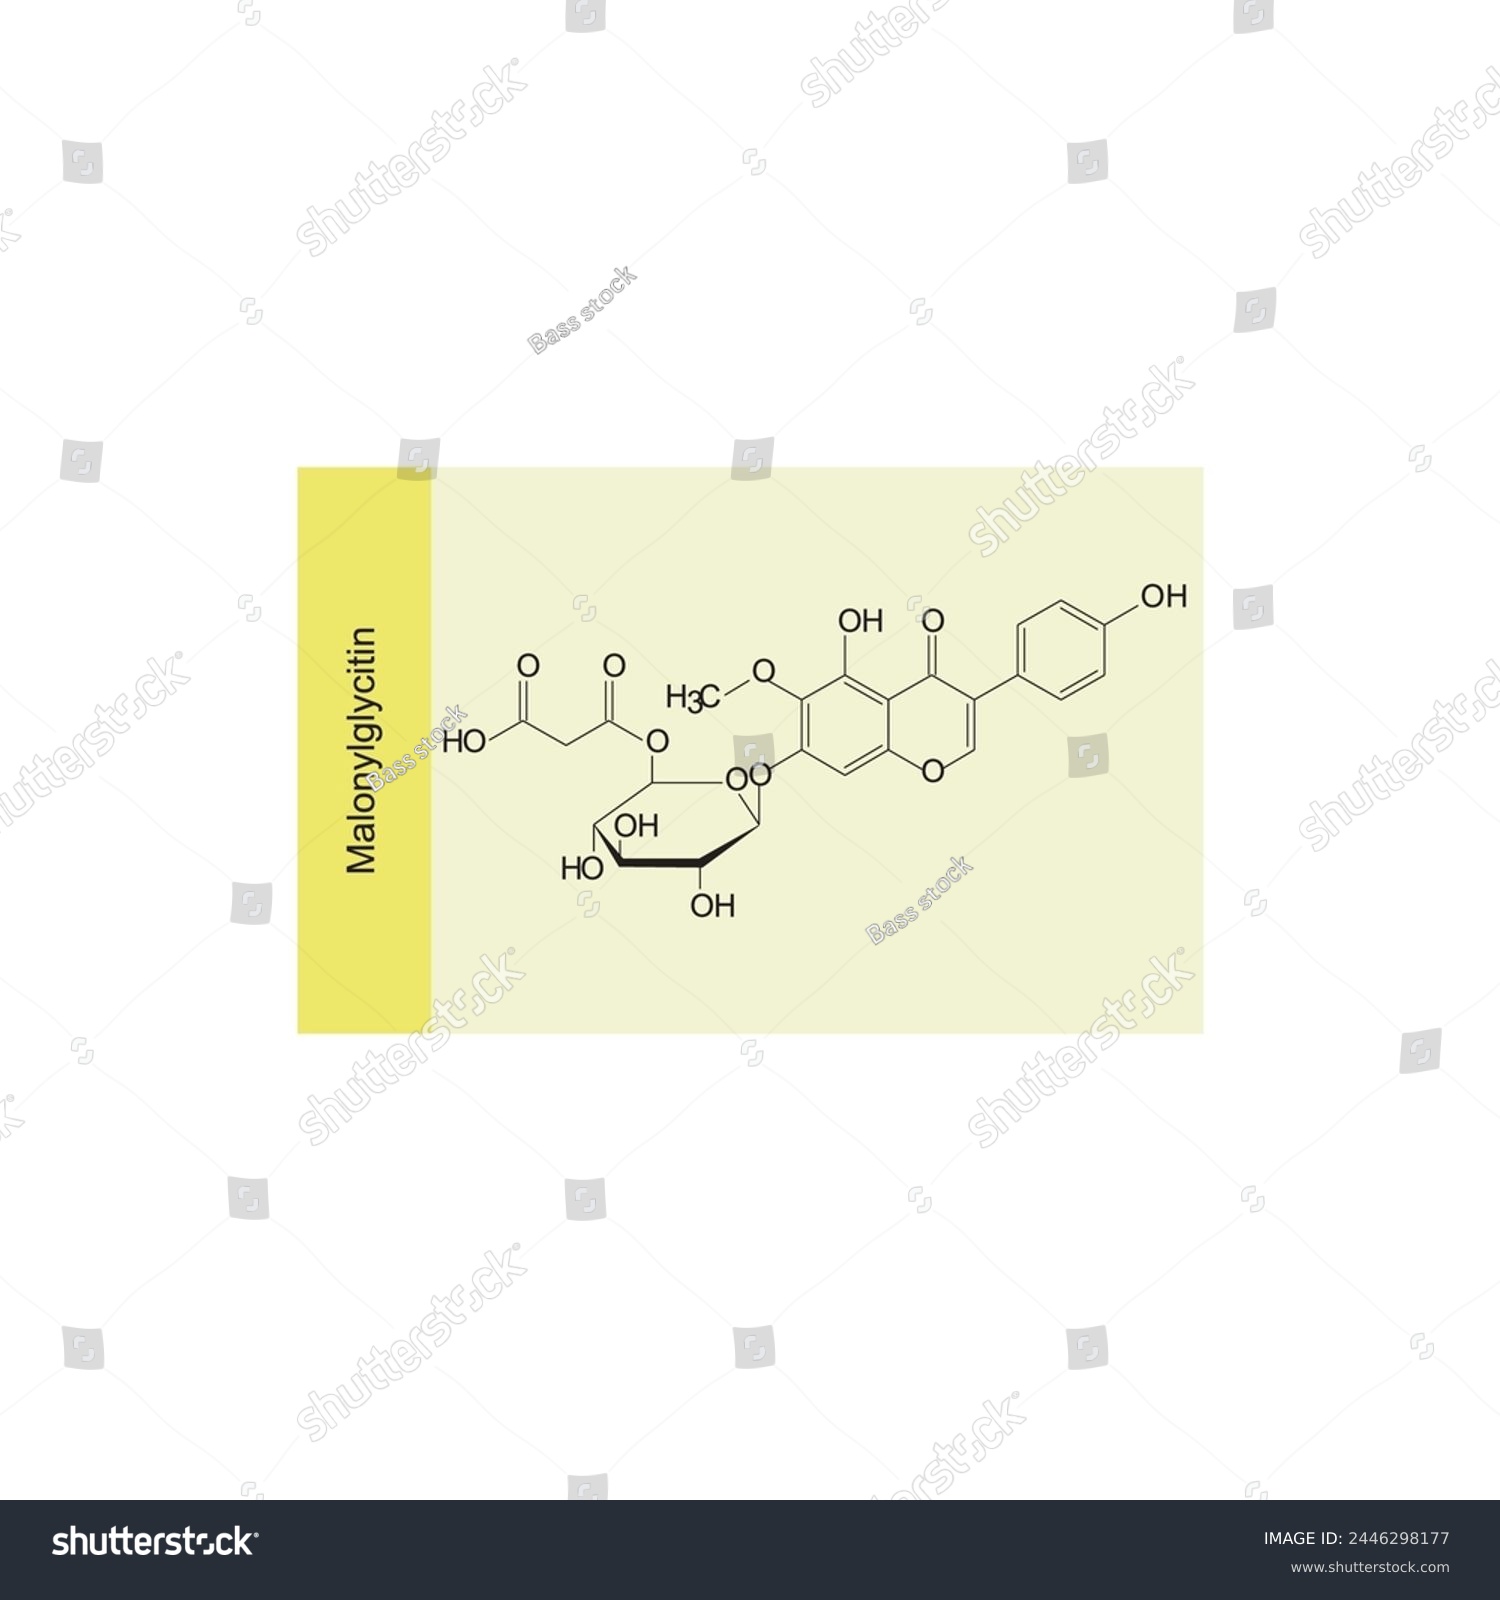 SVG of Malonylglycitin skeletal structure diagram. compound molecule scientific illustration on yellow background. svg